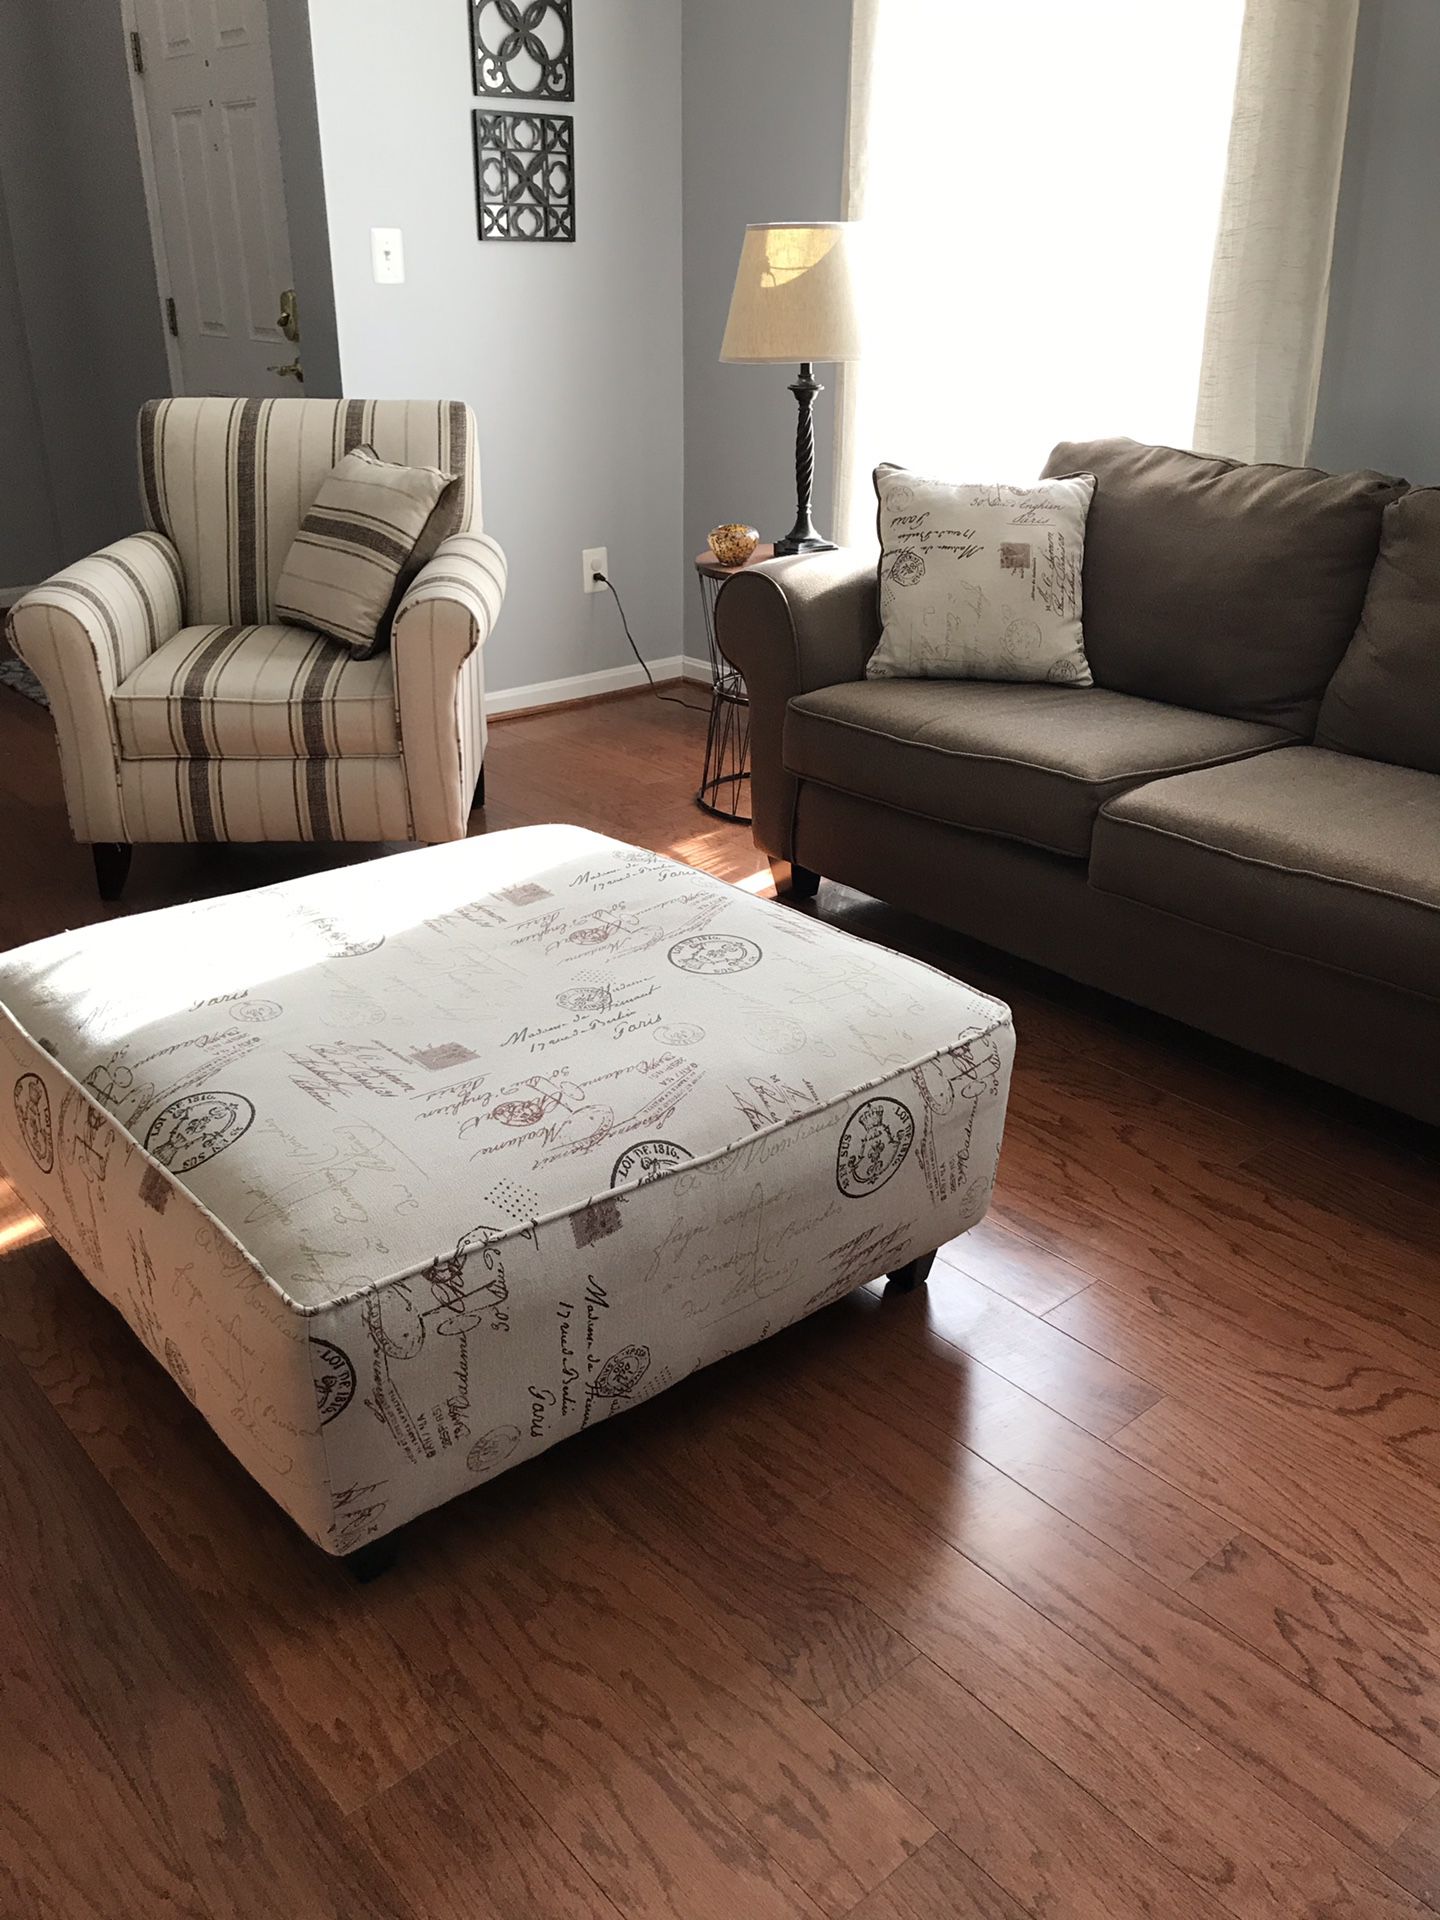 Living room set-loveseat, ottoman and side chair